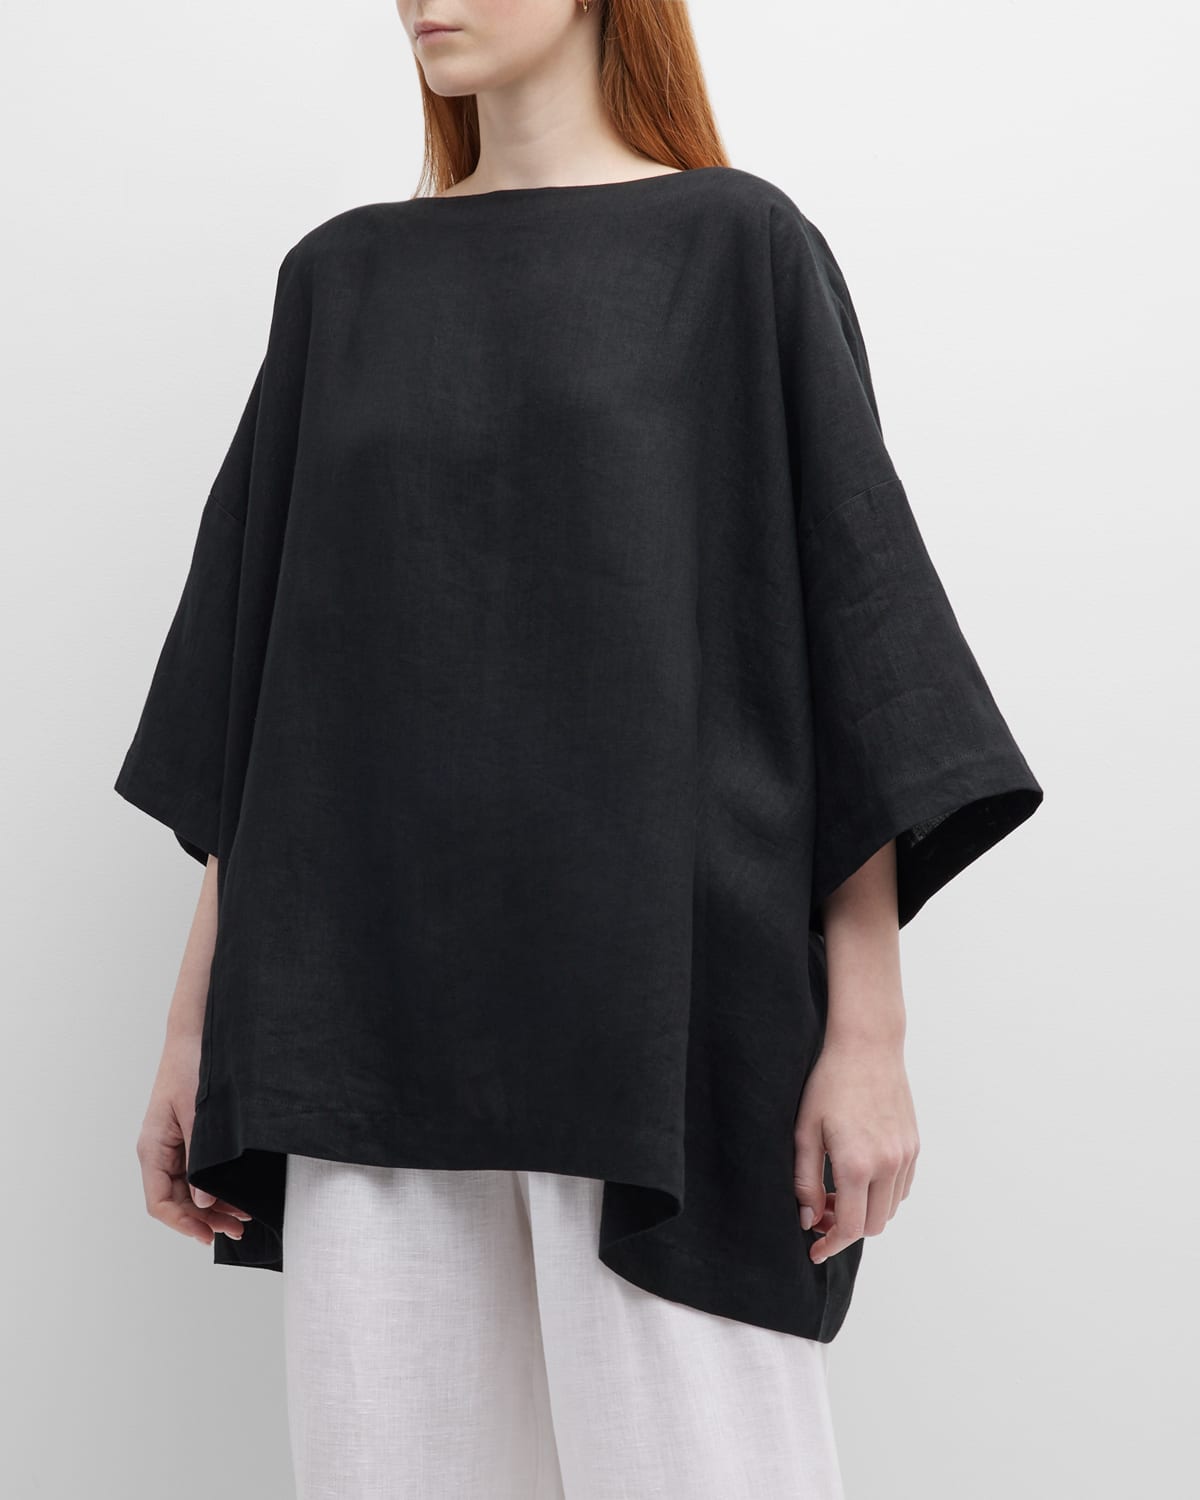 Angle-To-Front 3/4-Sleeve Scoop-Neck Tunic Shirt (Long Length)